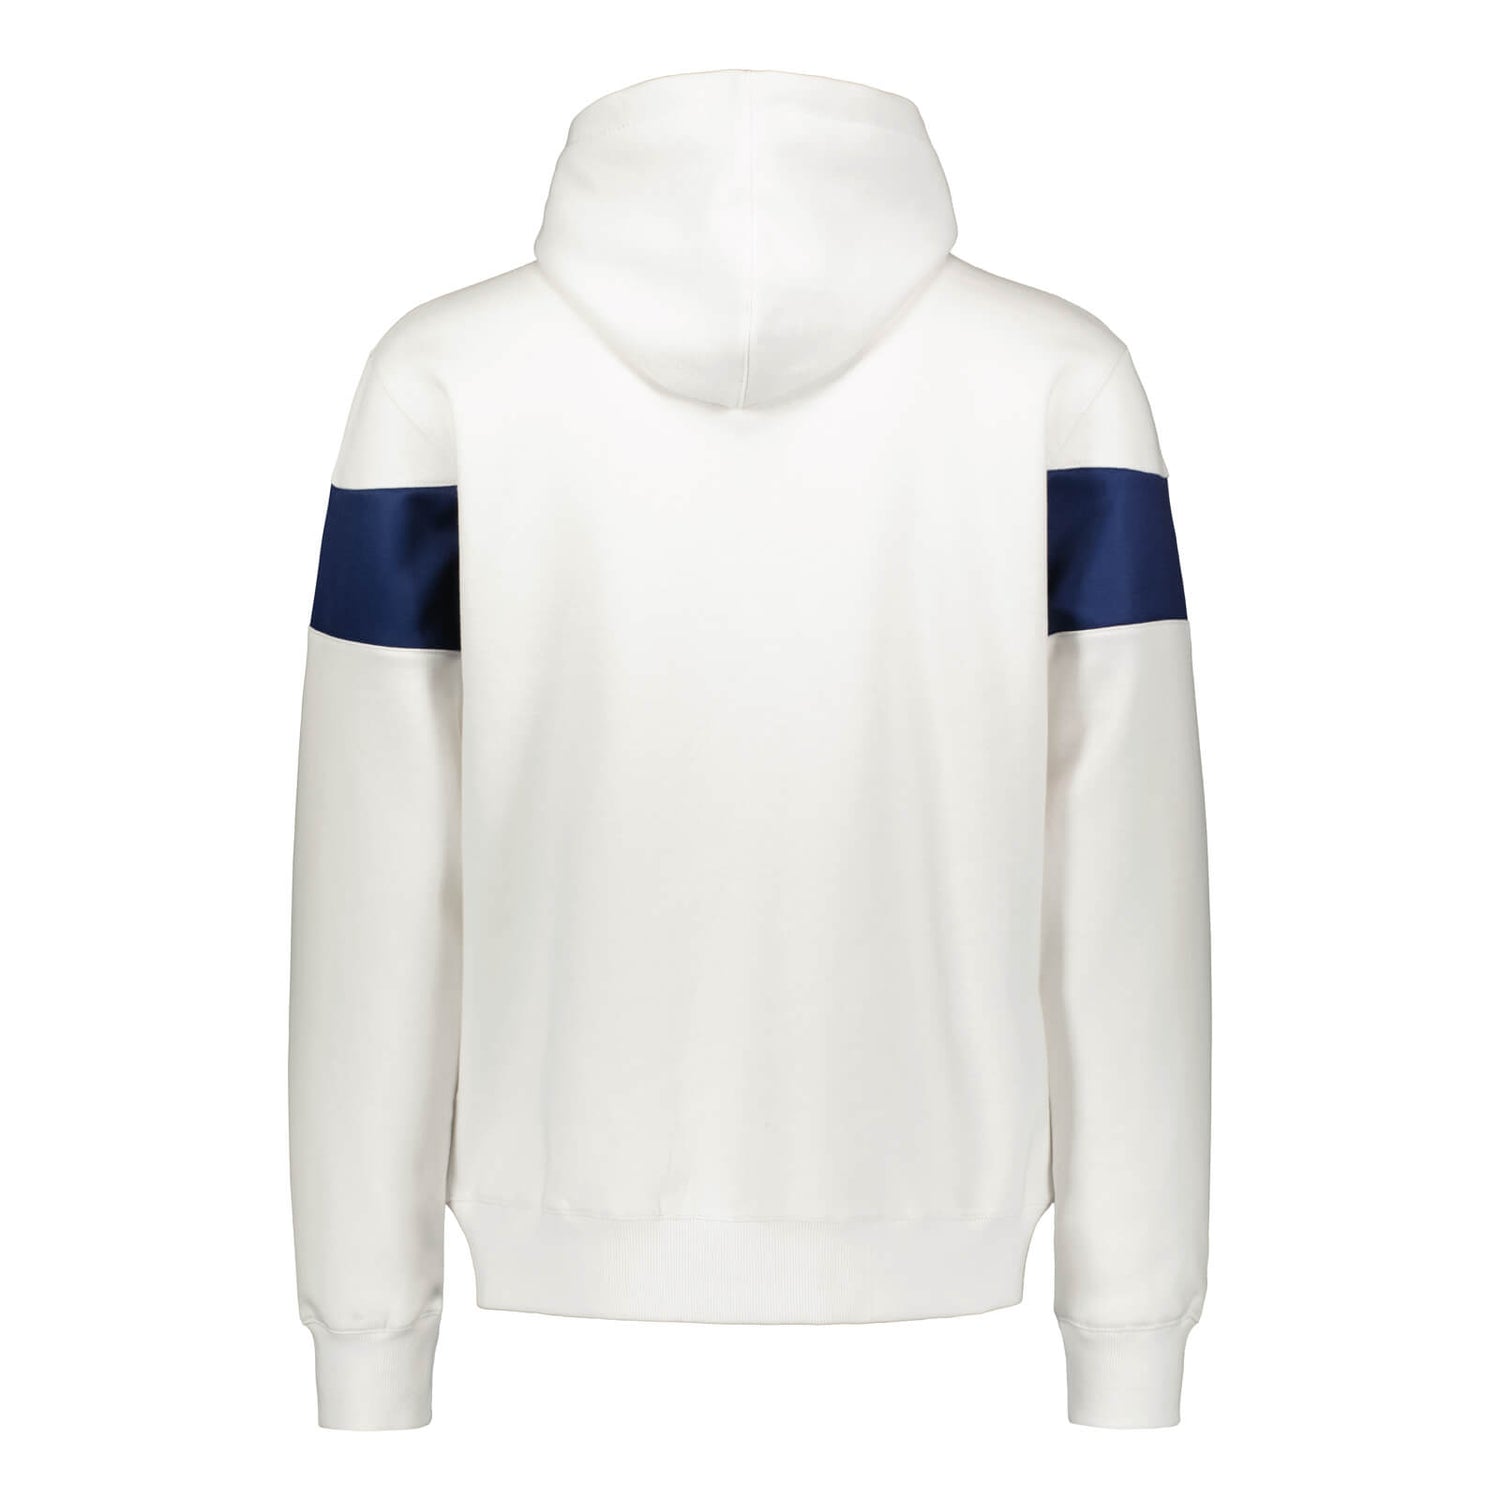 National team hoodie 2.0 with zipper